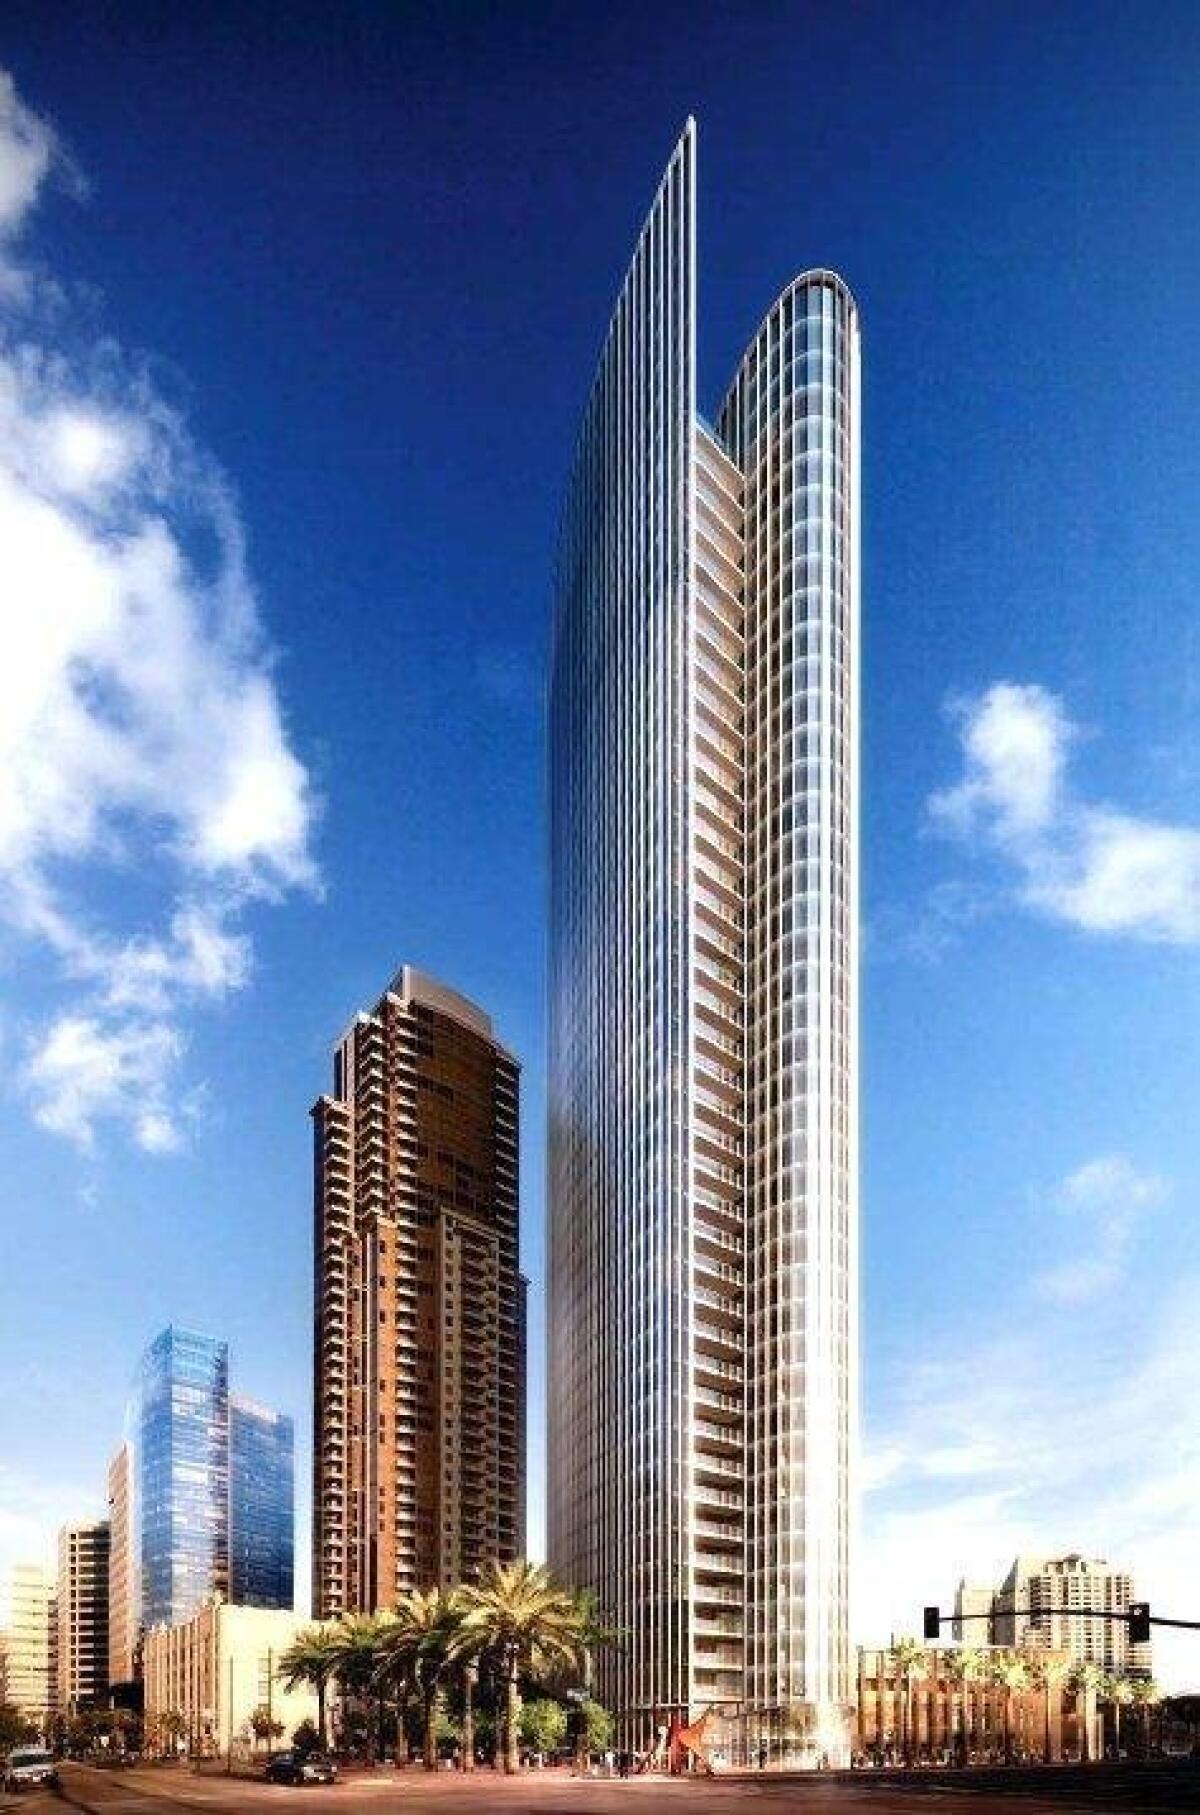 Bosa Development's Pacific Gate, a 41-story, 232-unit condo tower south of Broadway at Pacific Highway is projected to open in June 2017. Kohn Pedersen Fox